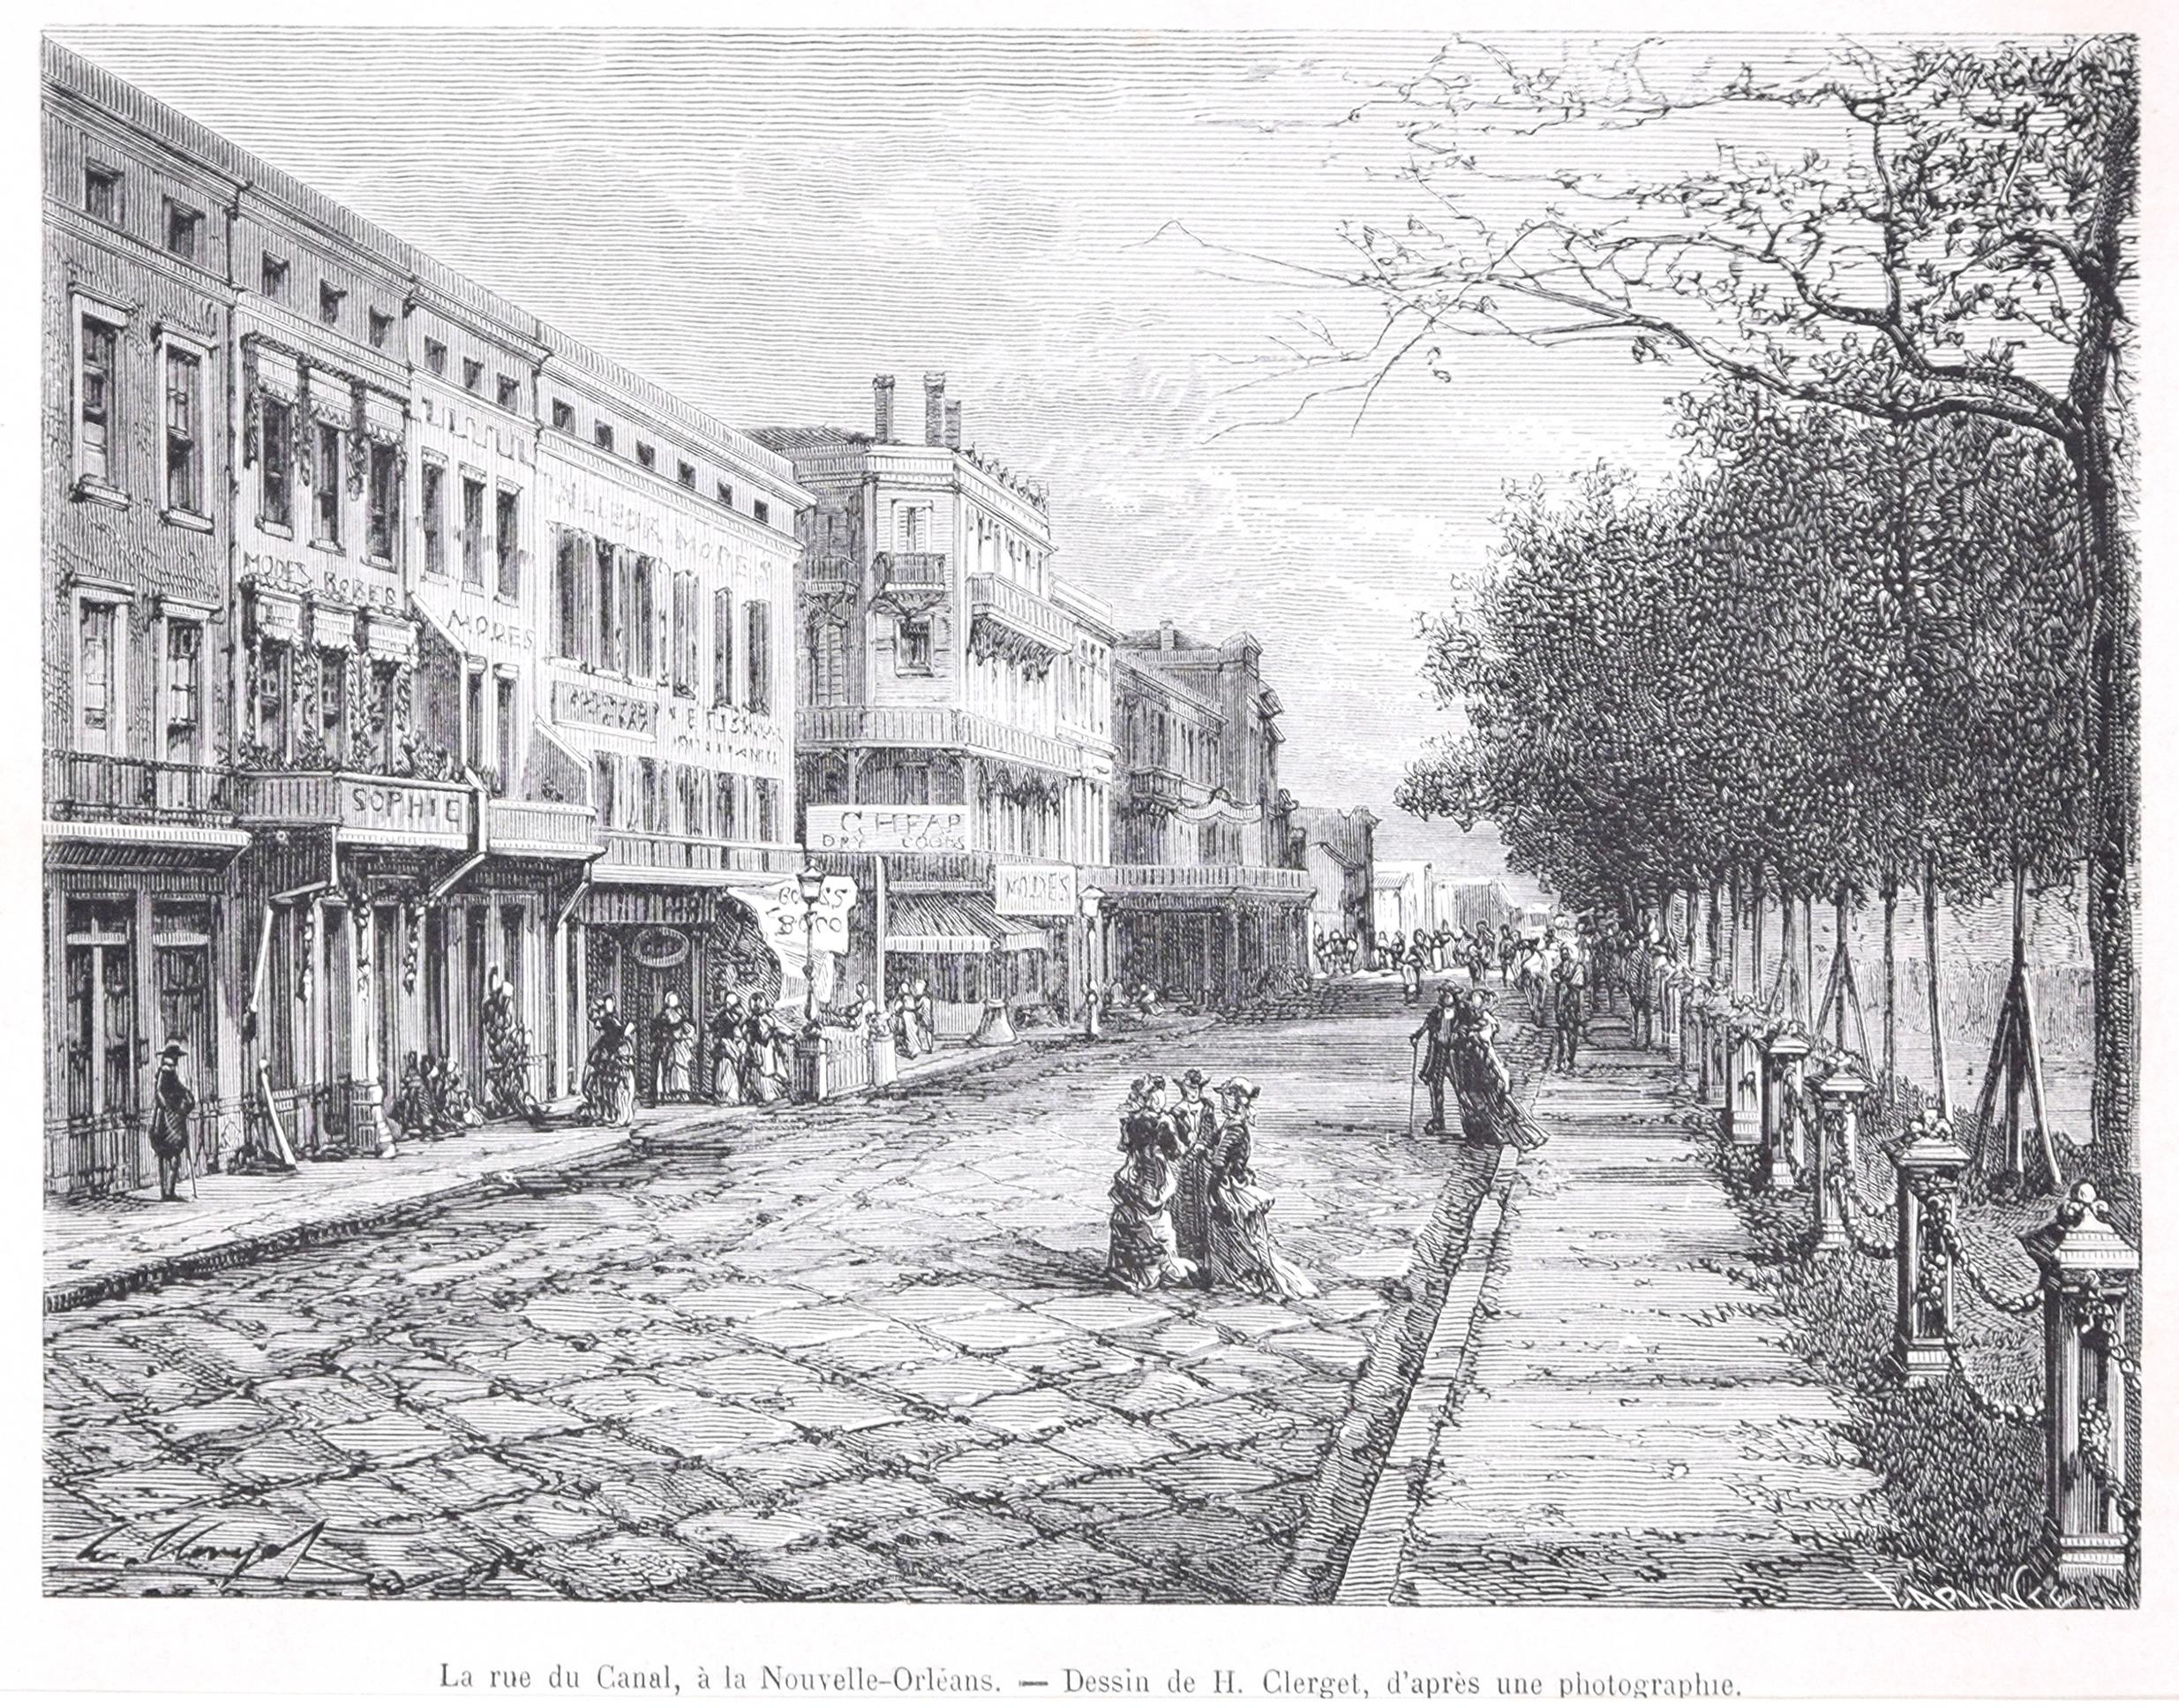 La Rue du Canal - View of New Orleans - Woodcut Print After Hubert Clerge - 1880